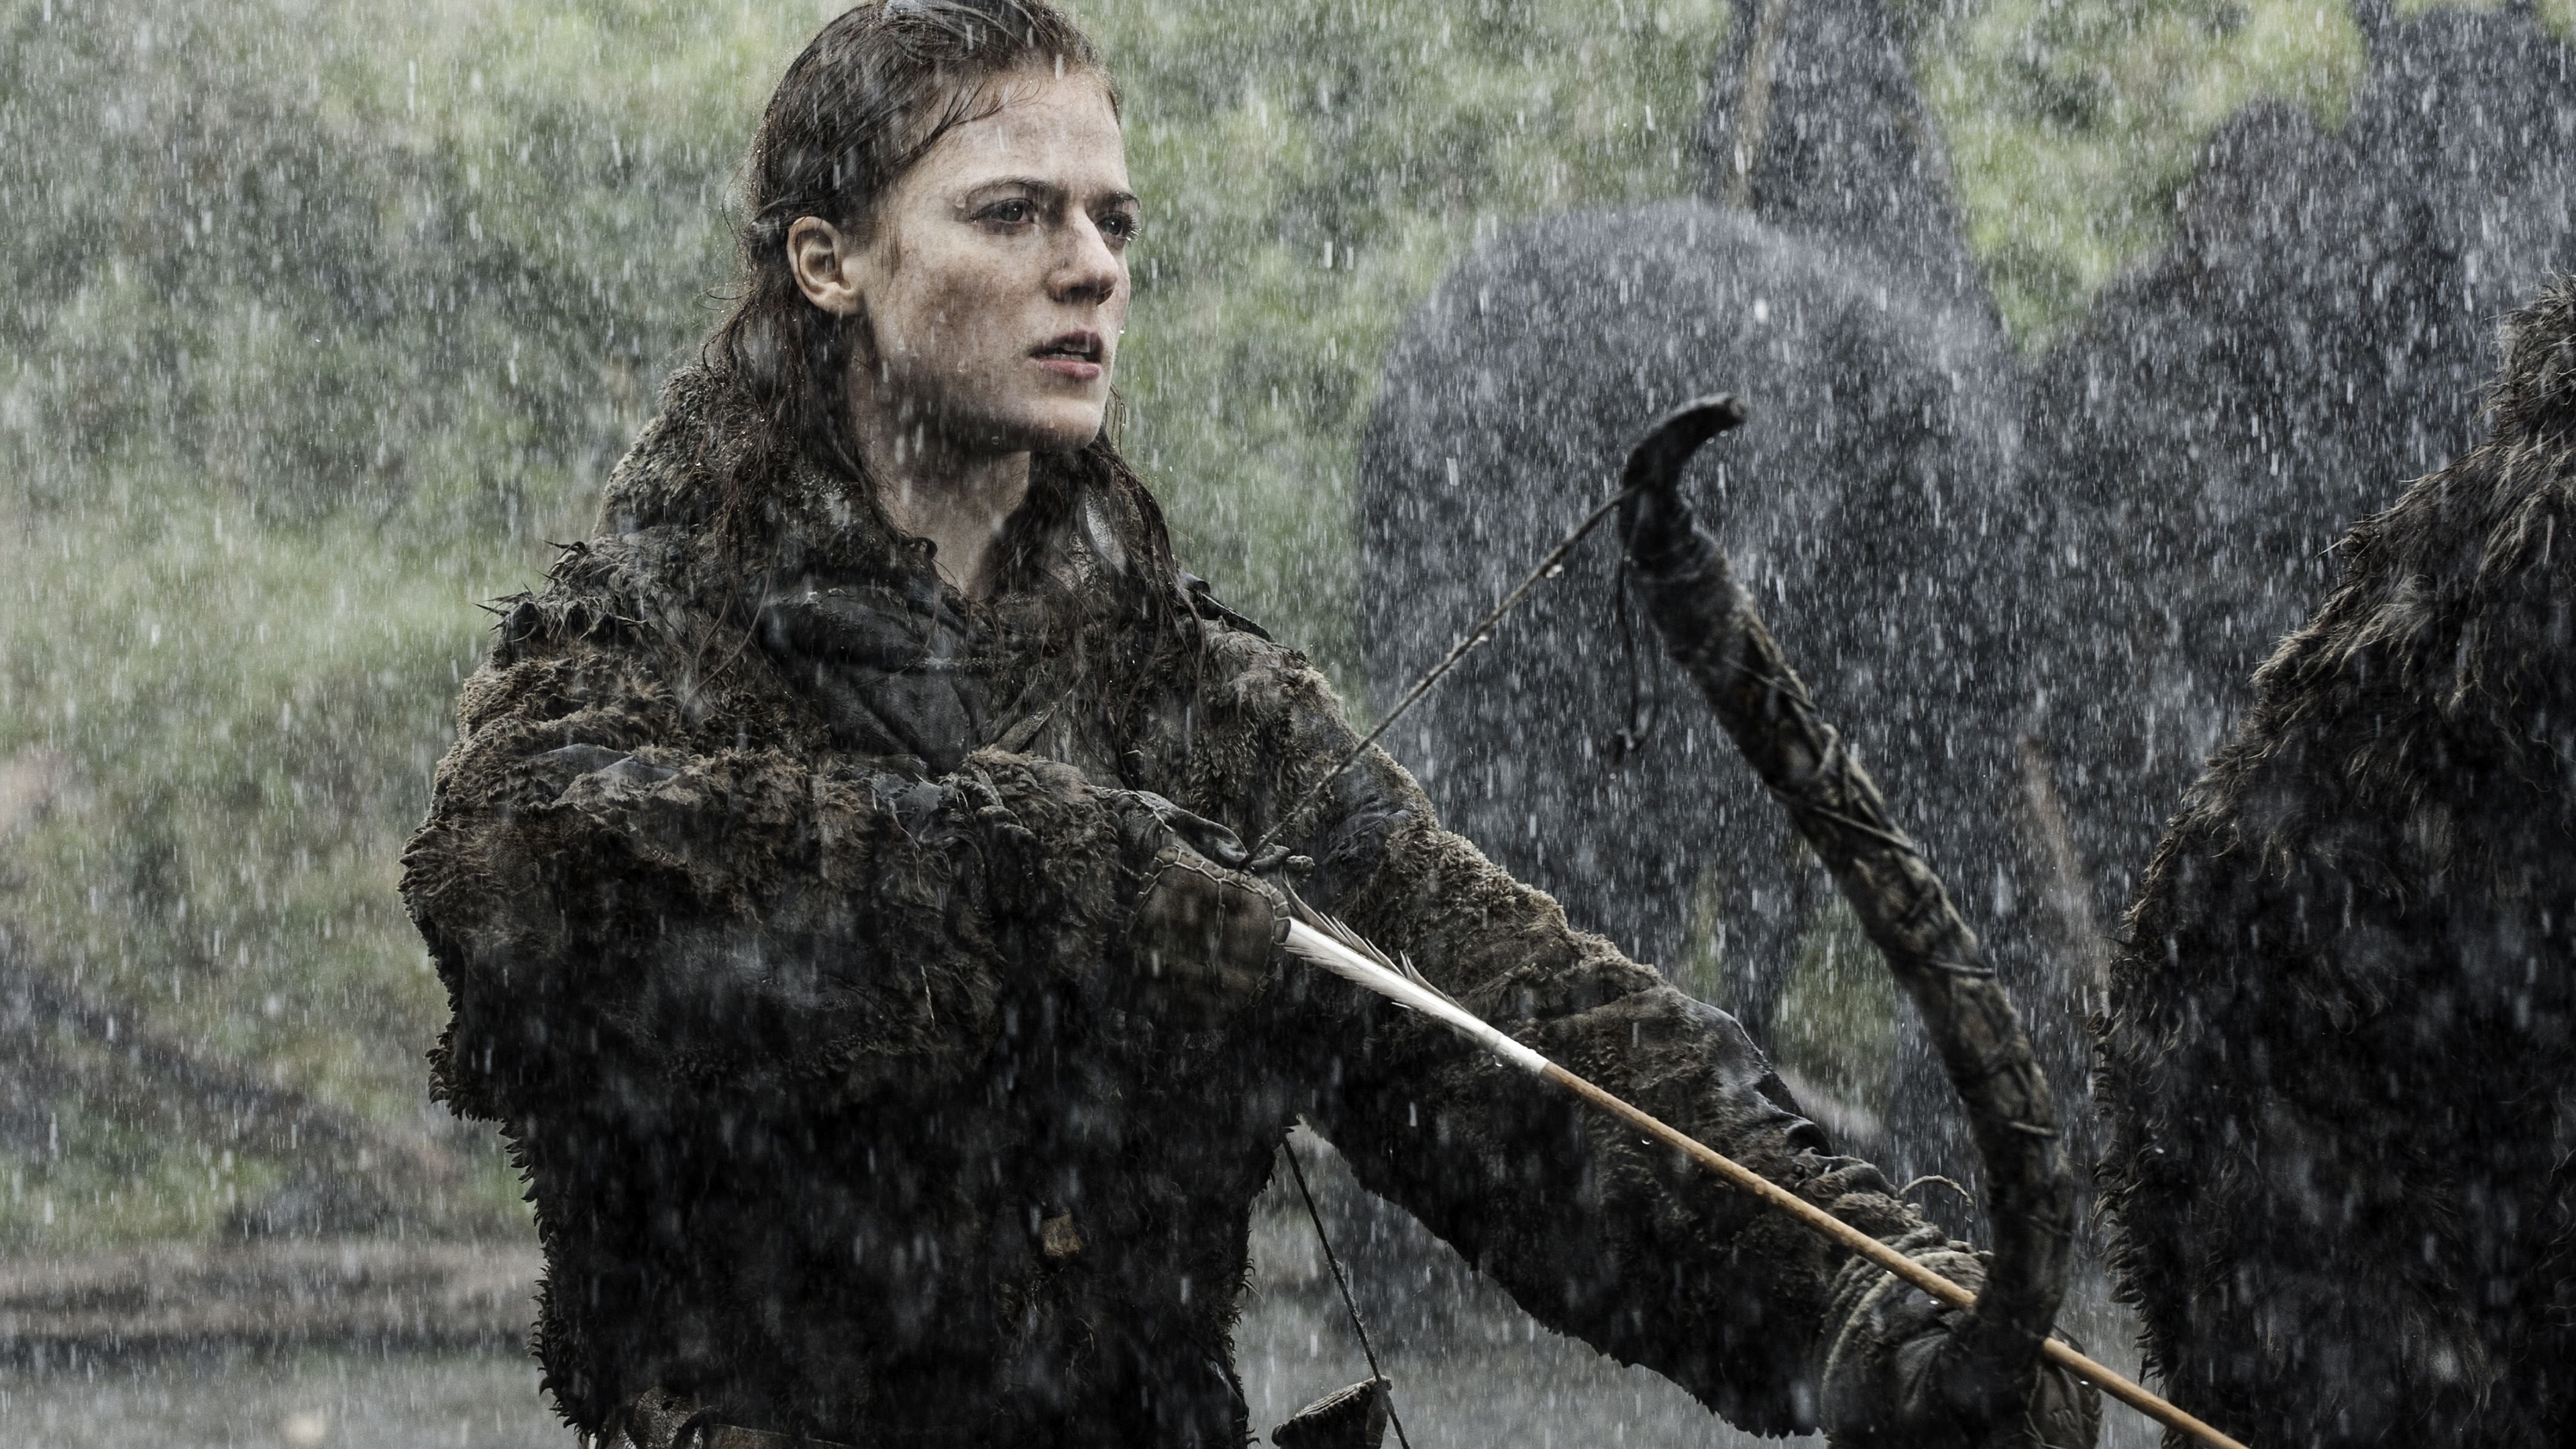 Ygritte from Game of Thrones wallpaper | movies and tv series ...